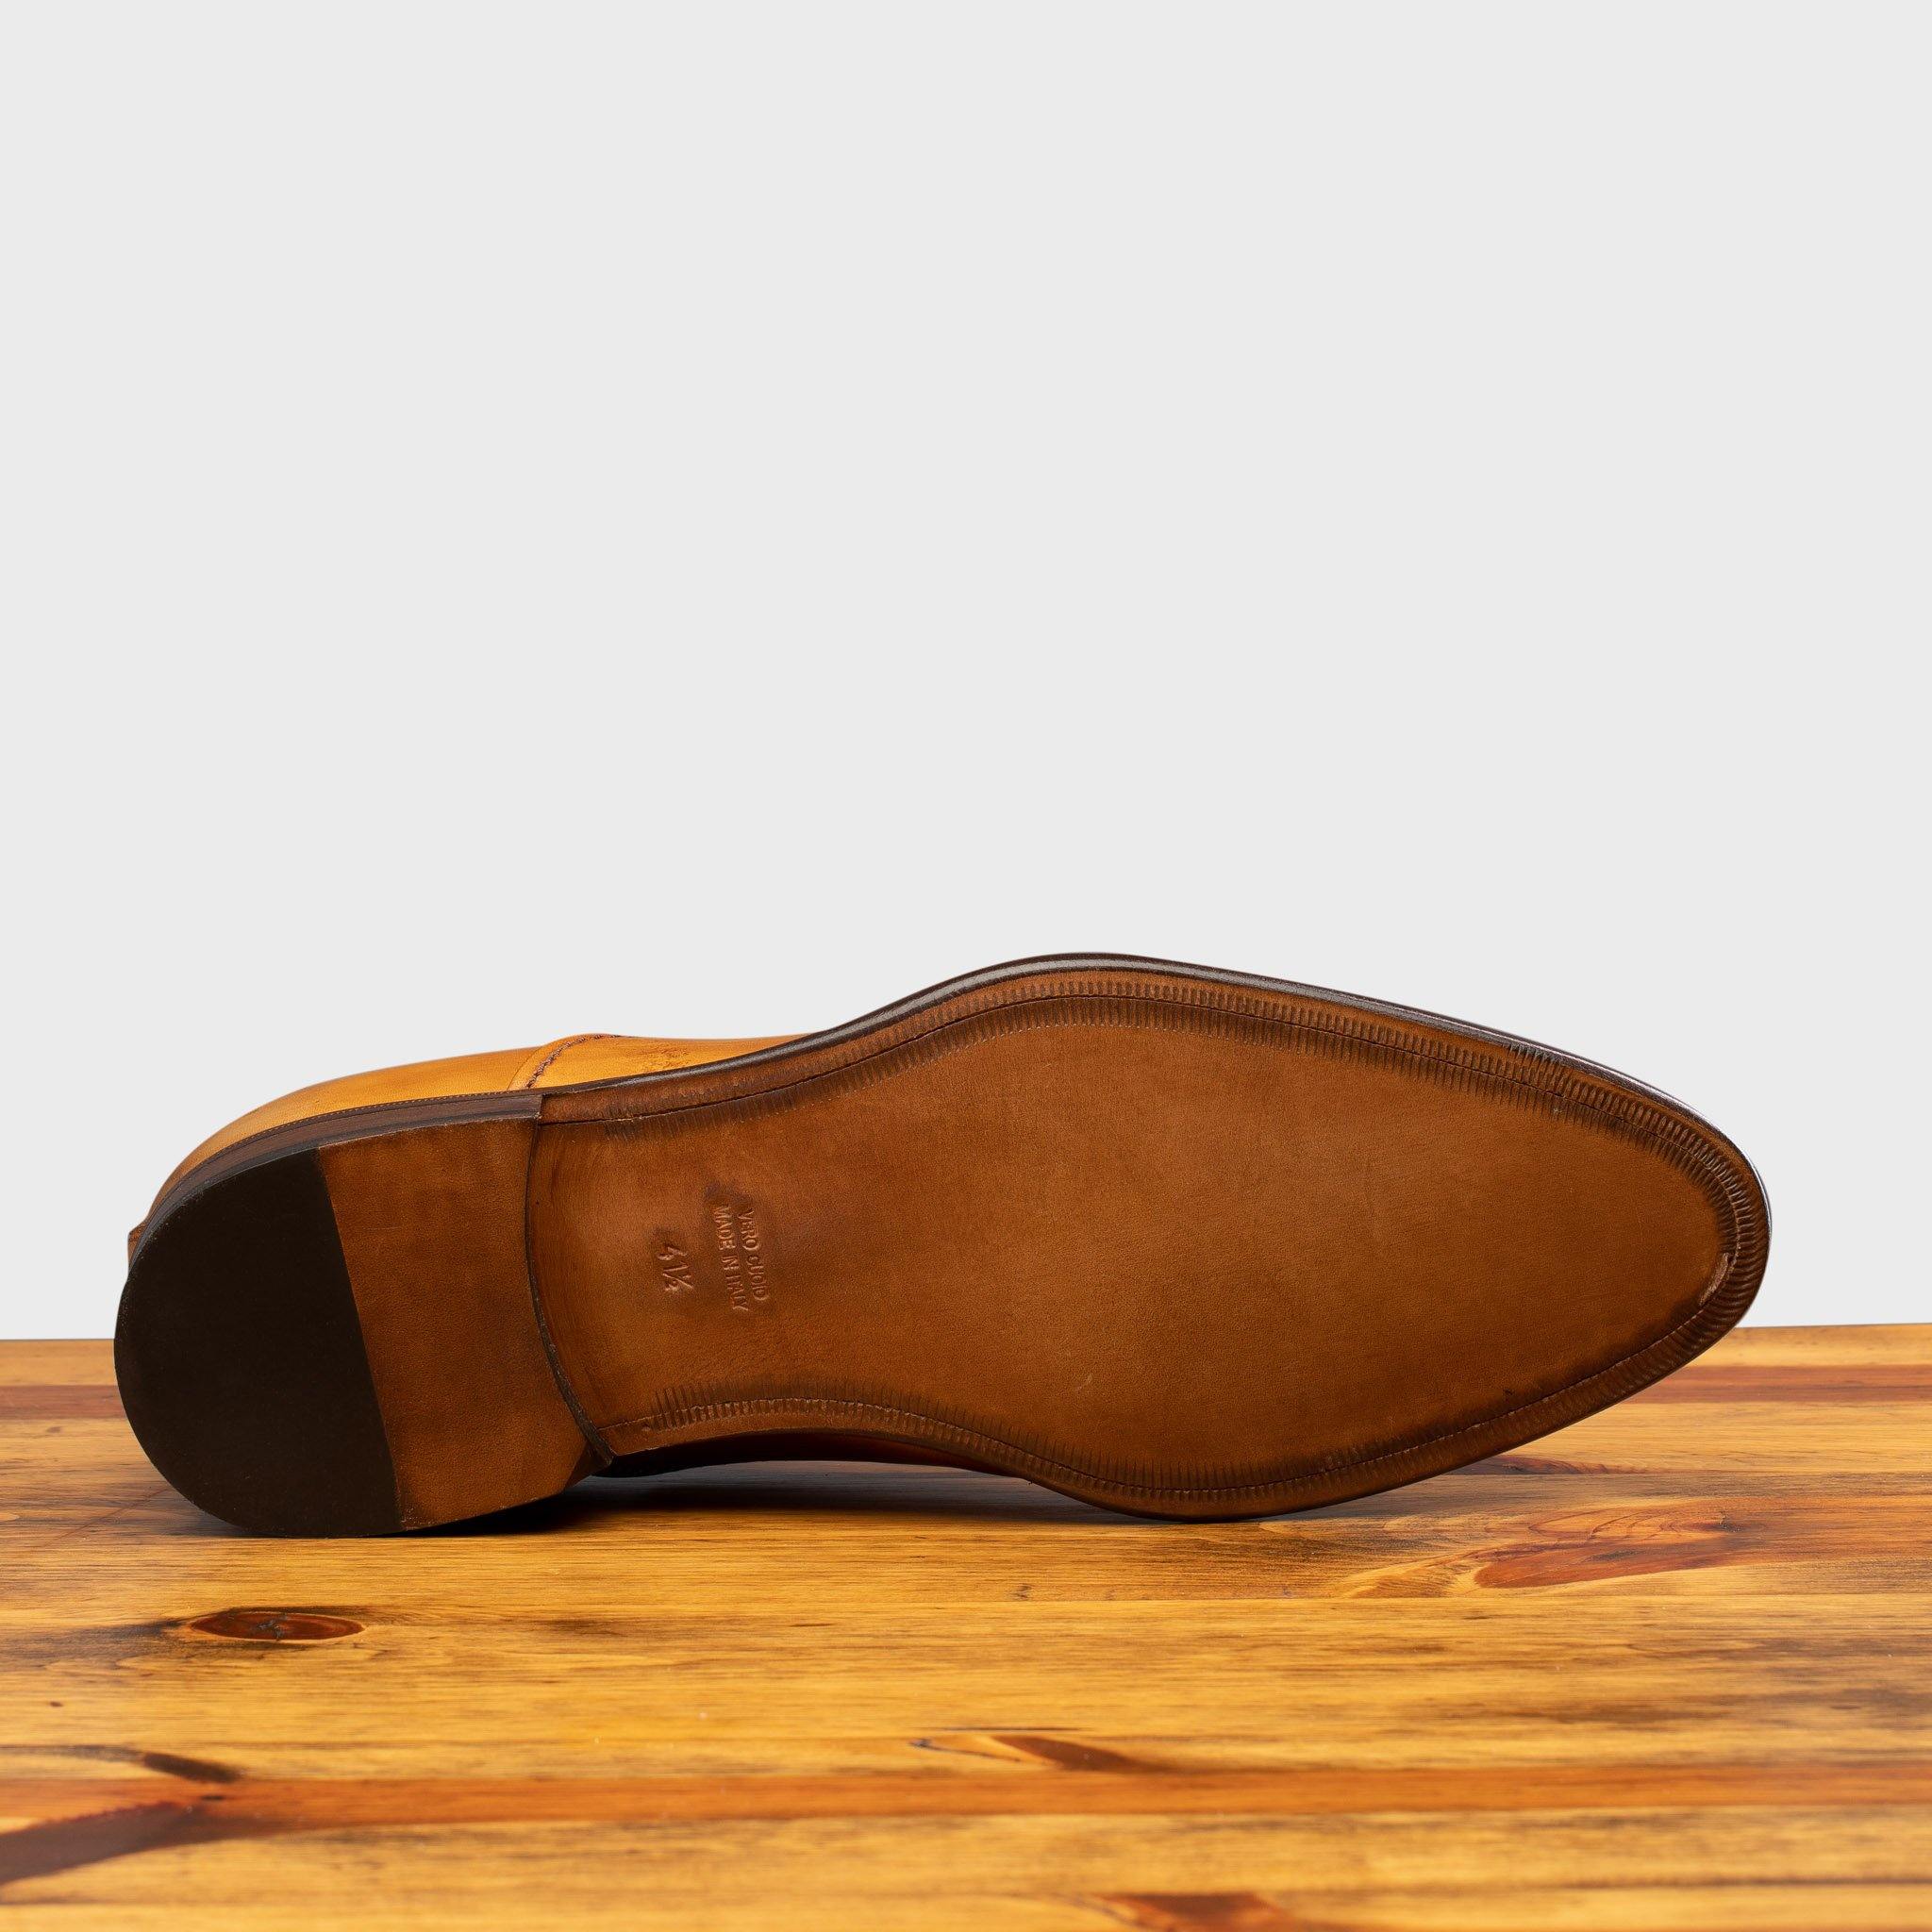 Full leather outsole of the 2361 Calzoleria Toscana Dark Caramel Cayenne Calf Cap-Toe on top of a wooden table